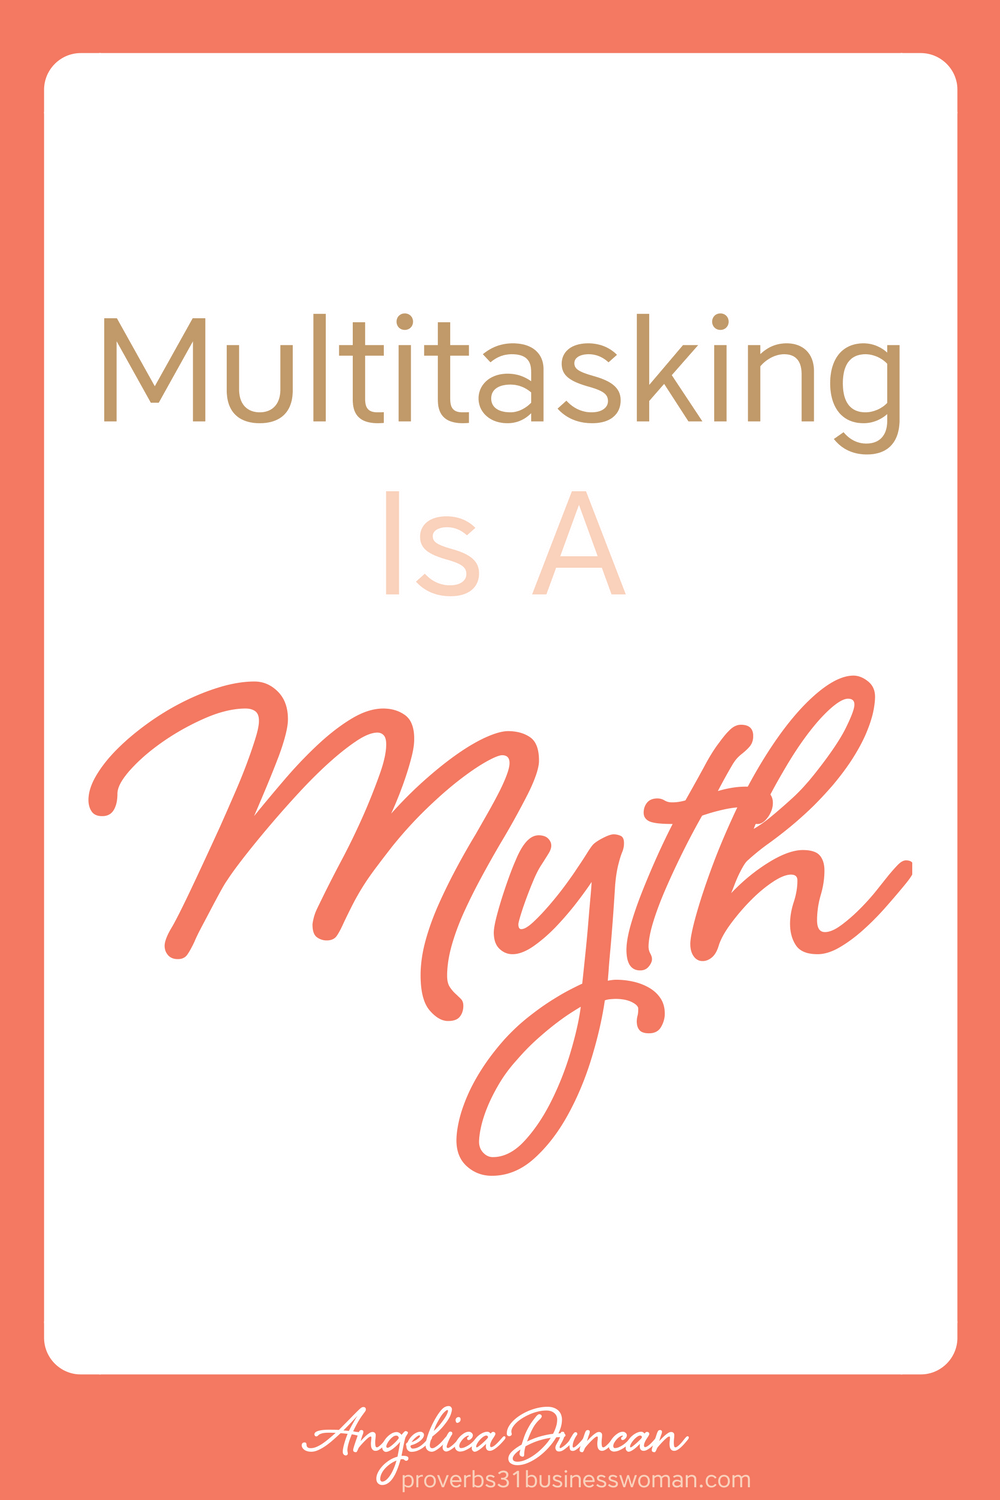 What if I told you that multitasking is a myth? Here's the secret to getting more done in less time + boosting your productivity! #multitasking #christianwomenleaders #womenleaders #mompreneur #onlinebusiness #wahm #womeninbusiness #christianbusiness #christianwomeninbusiness #christianentrepreneurs #proverbs31 #proverbs31woman #proverbs31businesswoman #proverbs31enrepreneur #p31 #silkoversteel #sos #angelicaduncan